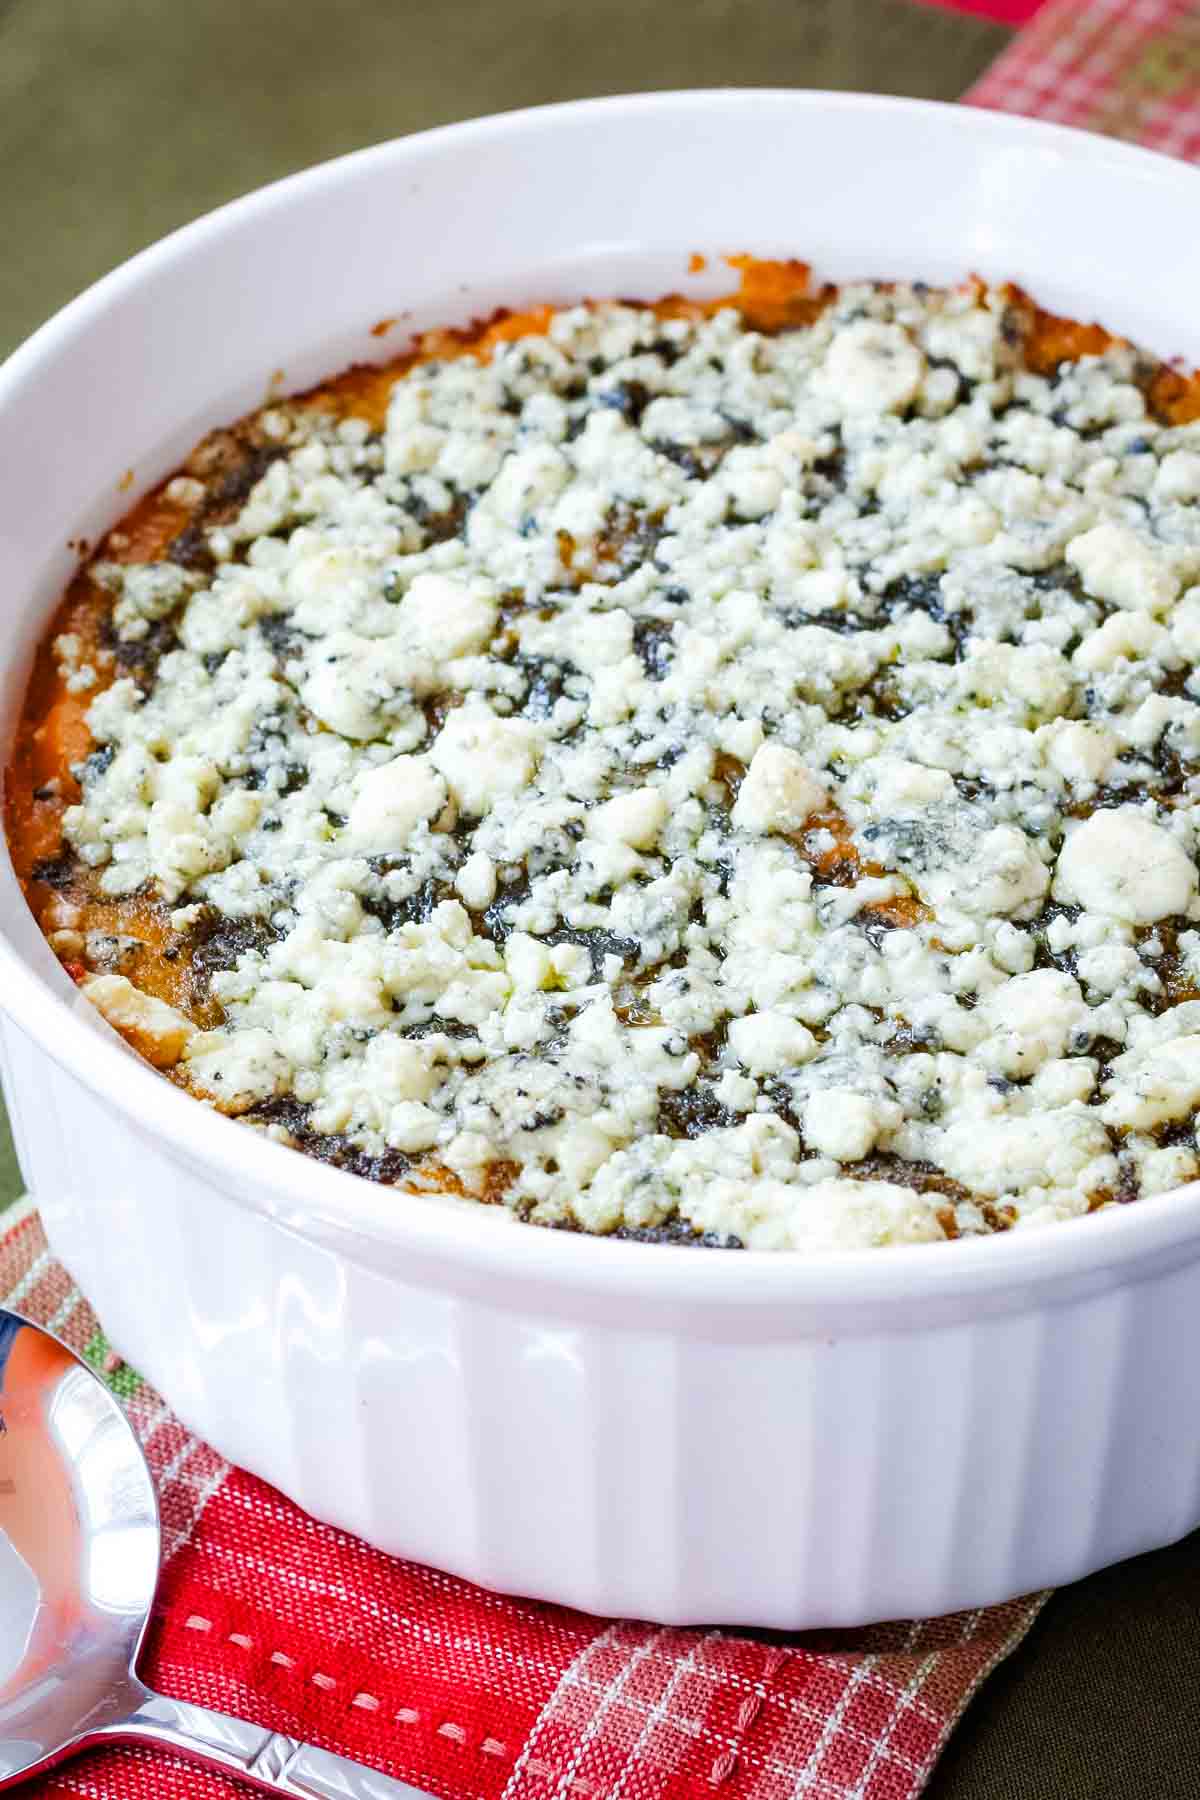 A baked butternut squash casserole topped with crumbled blue cheese in a round white ceramic dish.